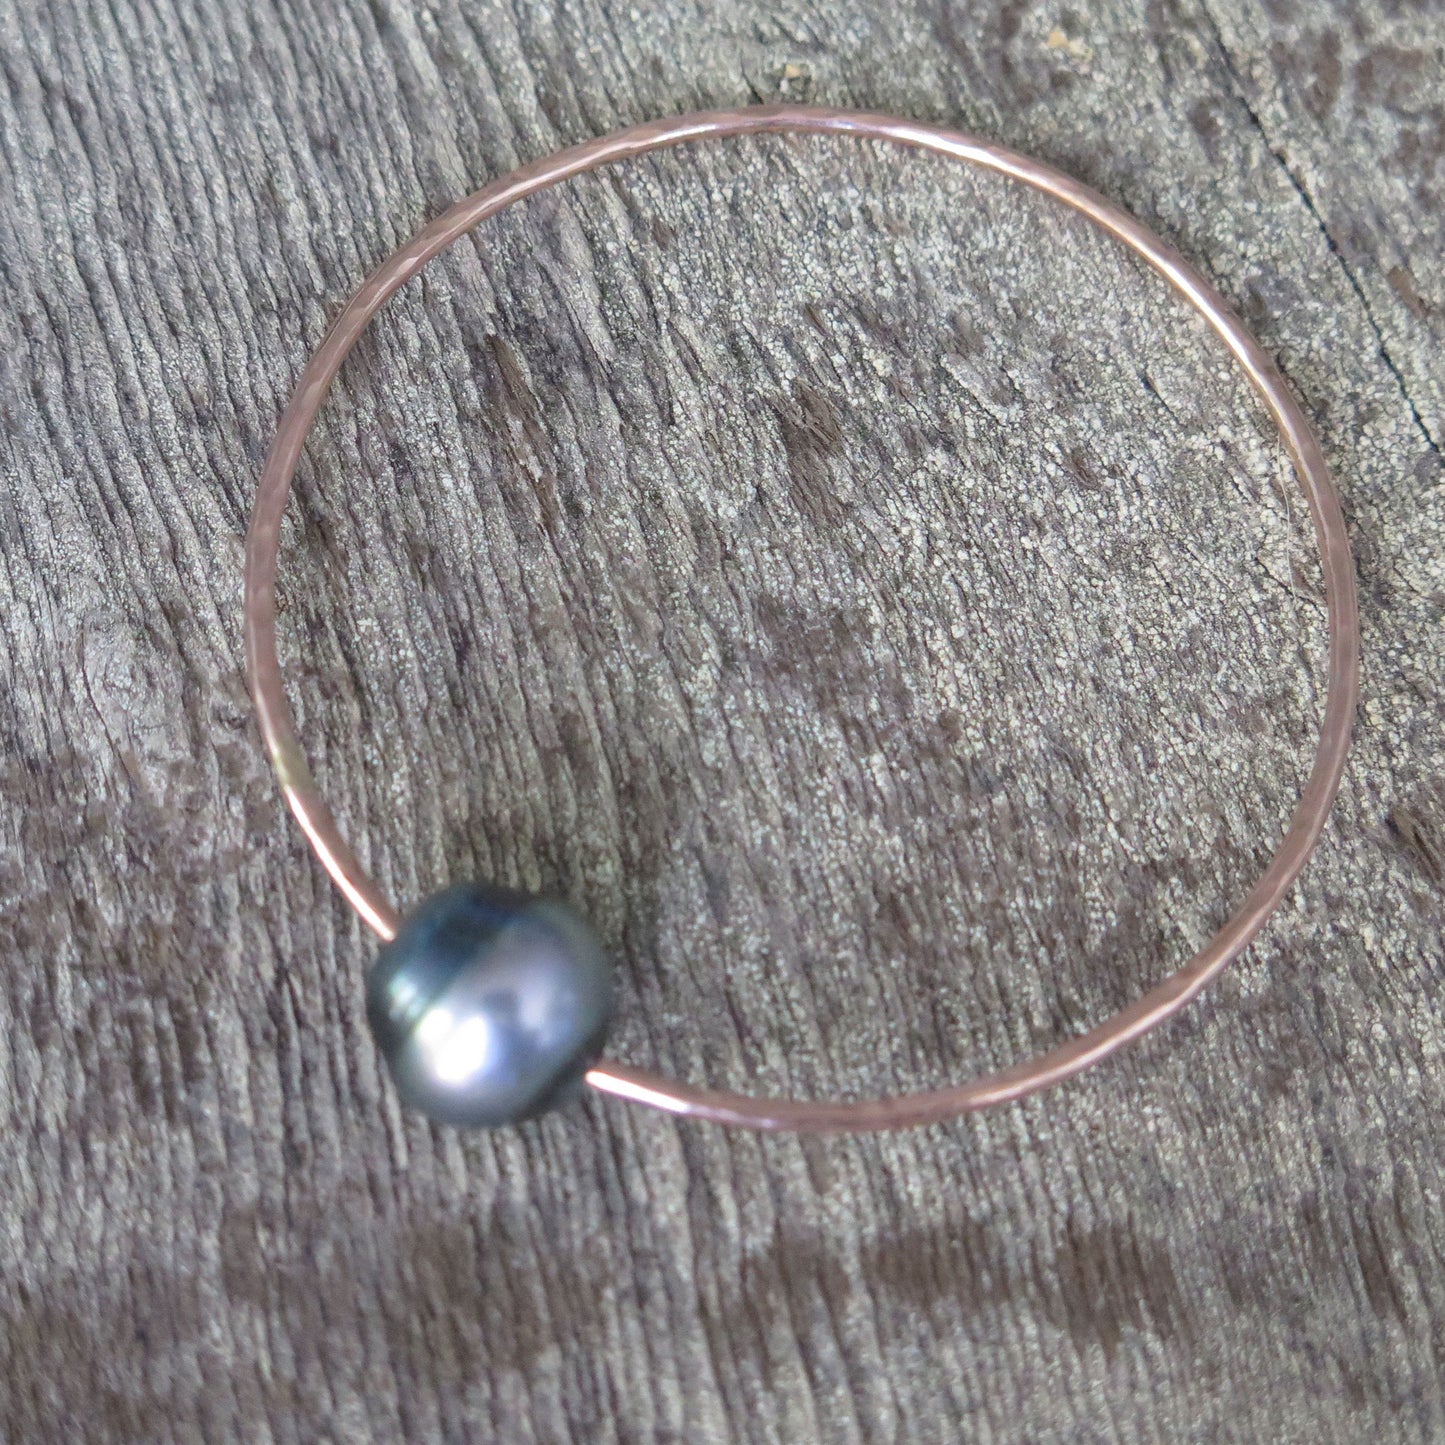 a single black pearl on a rose gold wire shaped into a bangle sits on a wooden background